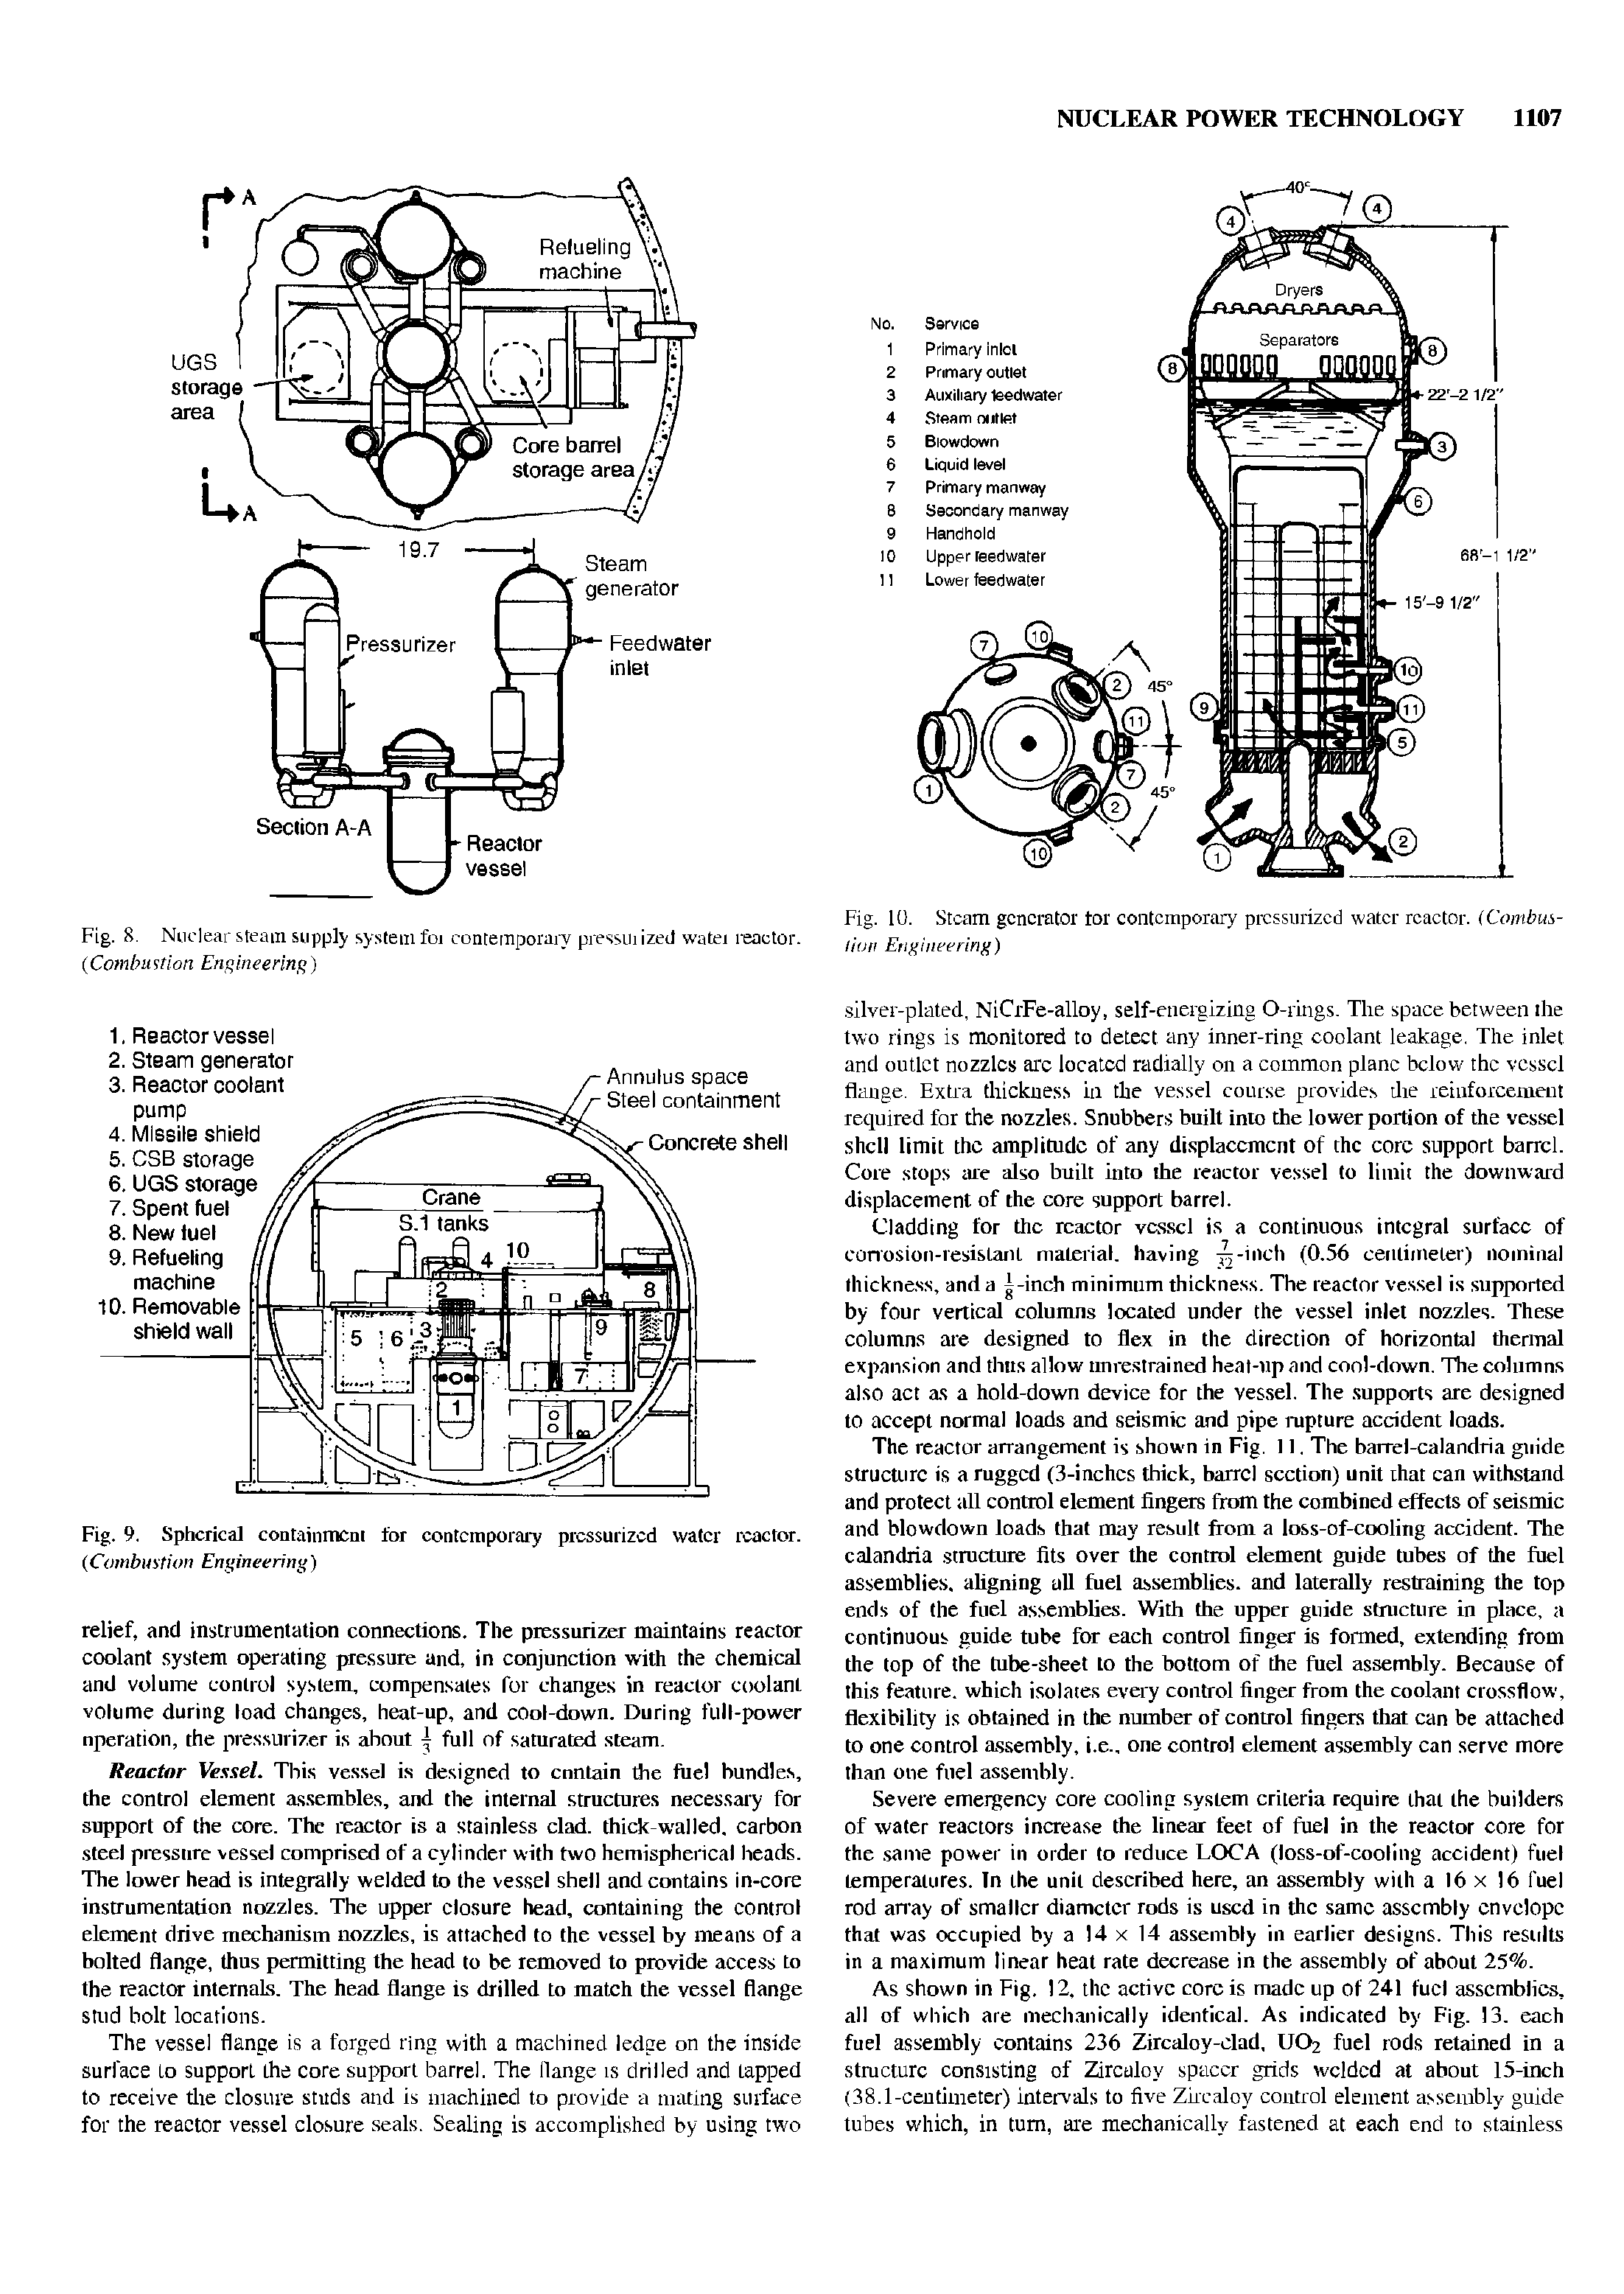 Fig. 8. Nuclear steam supply system foi contemporary pressui ized watei reactor. (Combu ttion Engineering)...